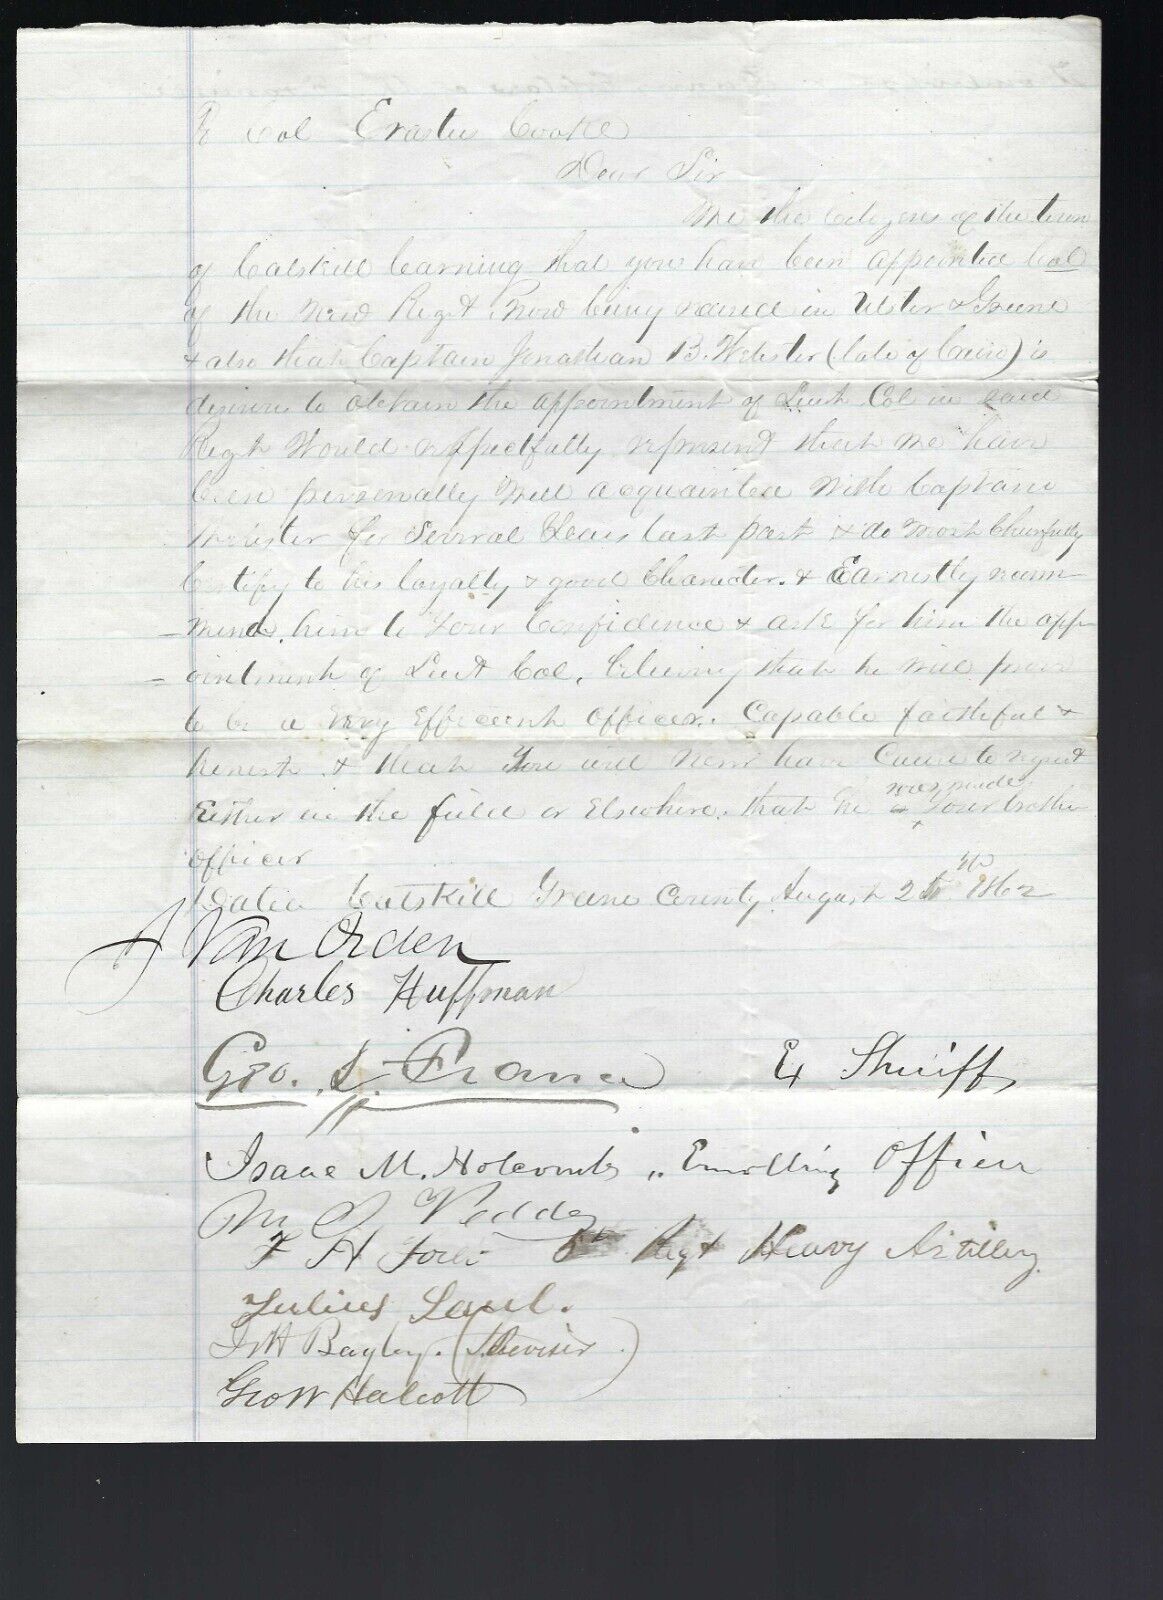 Cicil War document dated 1862 requesting an appointment of a Captain to Lt. Col.